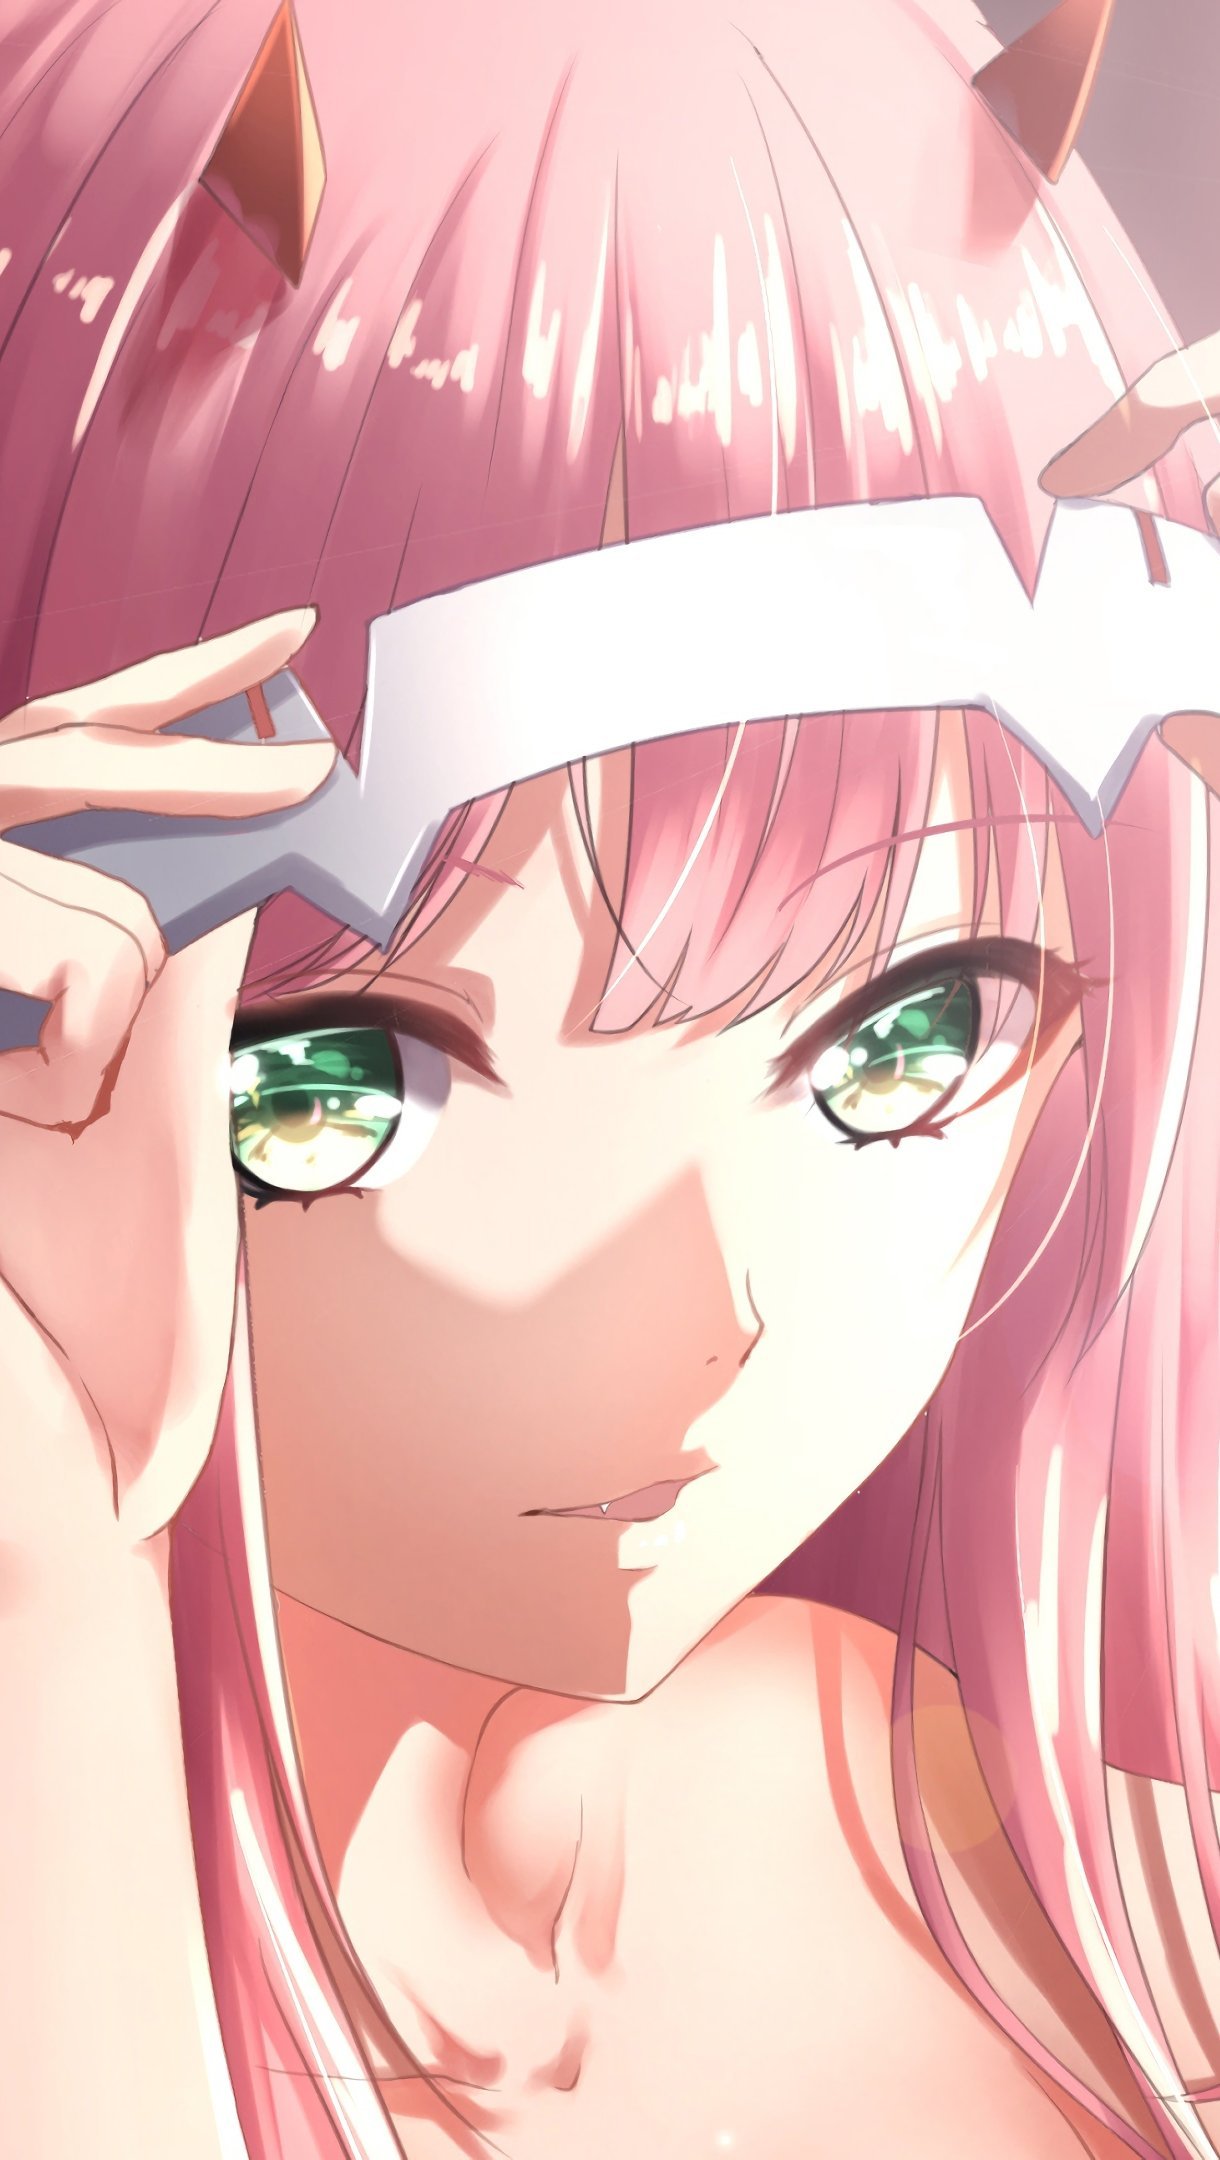 Zero Two from Darling in the Franxx Anime Wallpaper 4k Ultra HD ID:4667